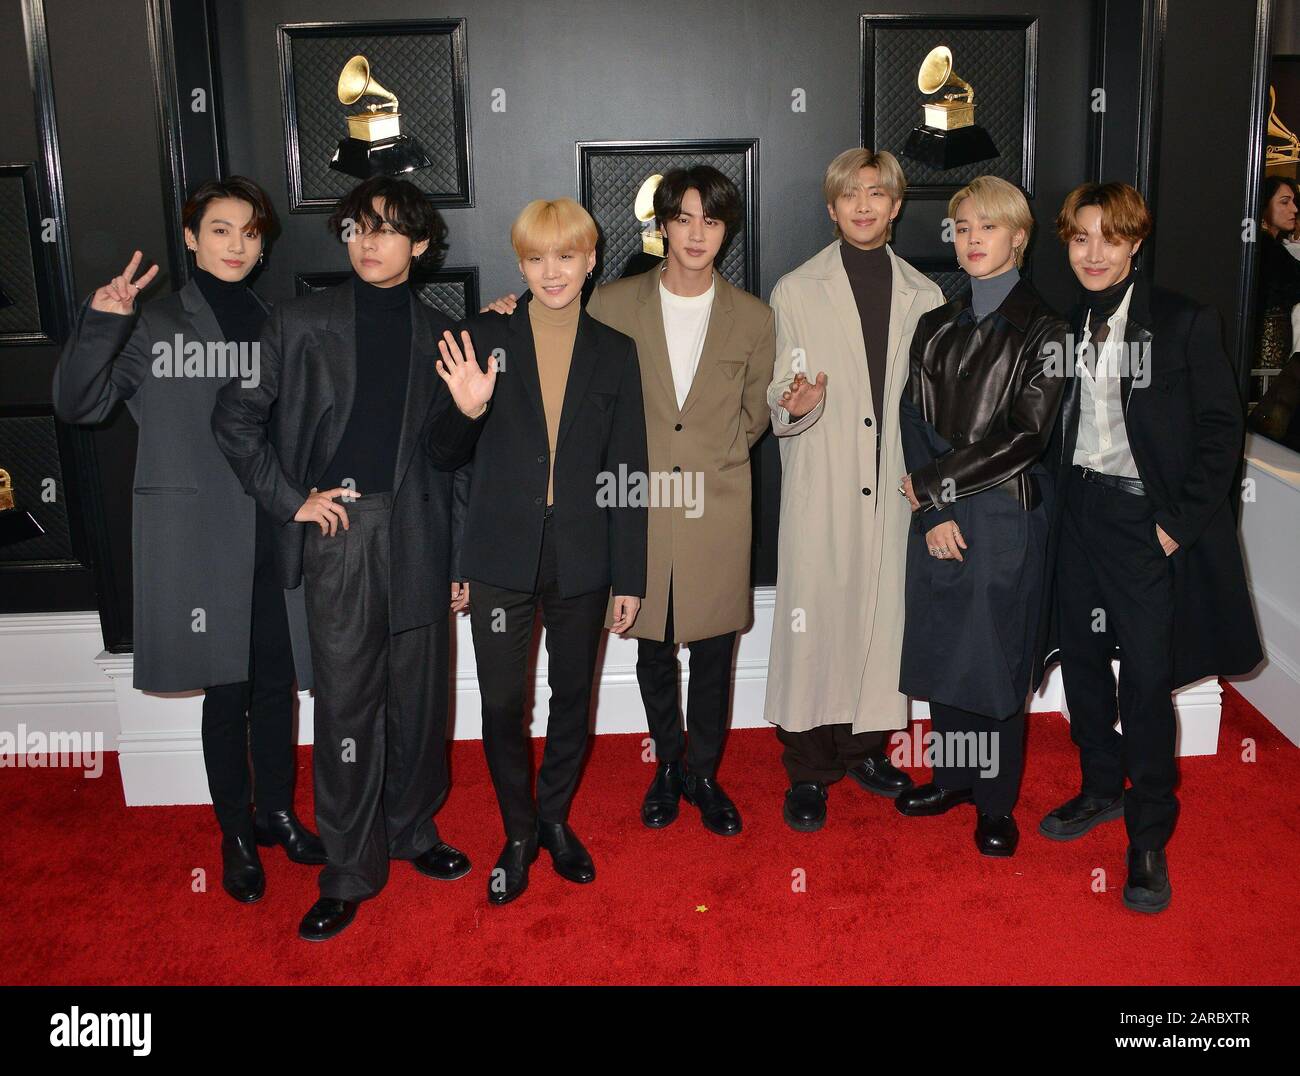 Los Angeles, CA. 26th Jan, 2020. RM, V, Suga, Jin, Jimin, Jungkook, J-Hope, of music group BTS 107 at arrivals for 62nd Annual Grammy Awards - Arrivals 2, STAPLES Center, Los Angeles, CA January 26, 2020. Credit: Tsuni/Everett Collection/Alamy Live News Stock Photo